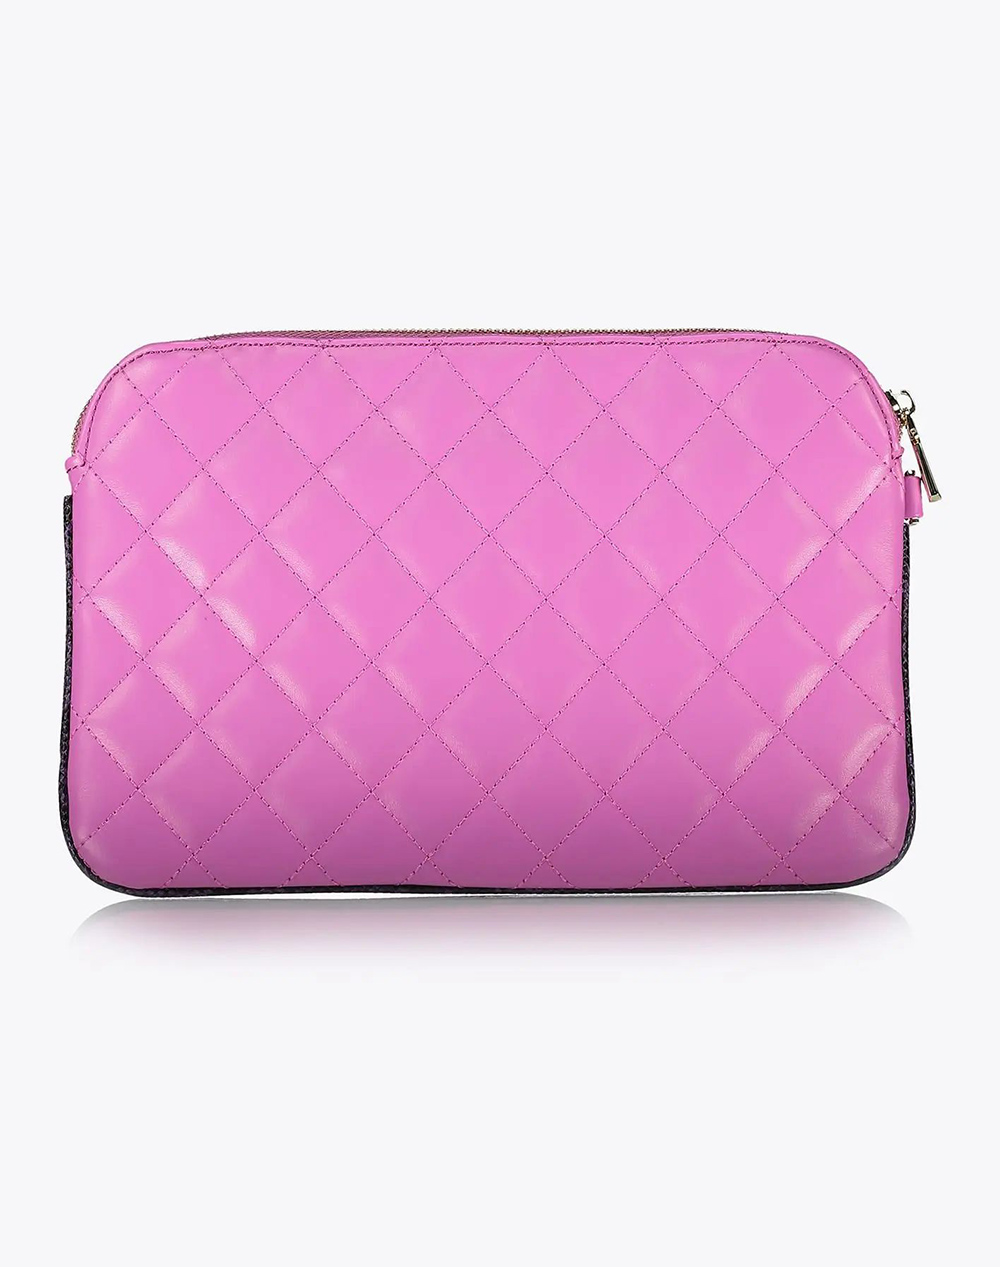 AXEL ACCESSORIES QUILTED HANDBAG (Dimensions: 18.5 x 27.5 x 1 cm.)